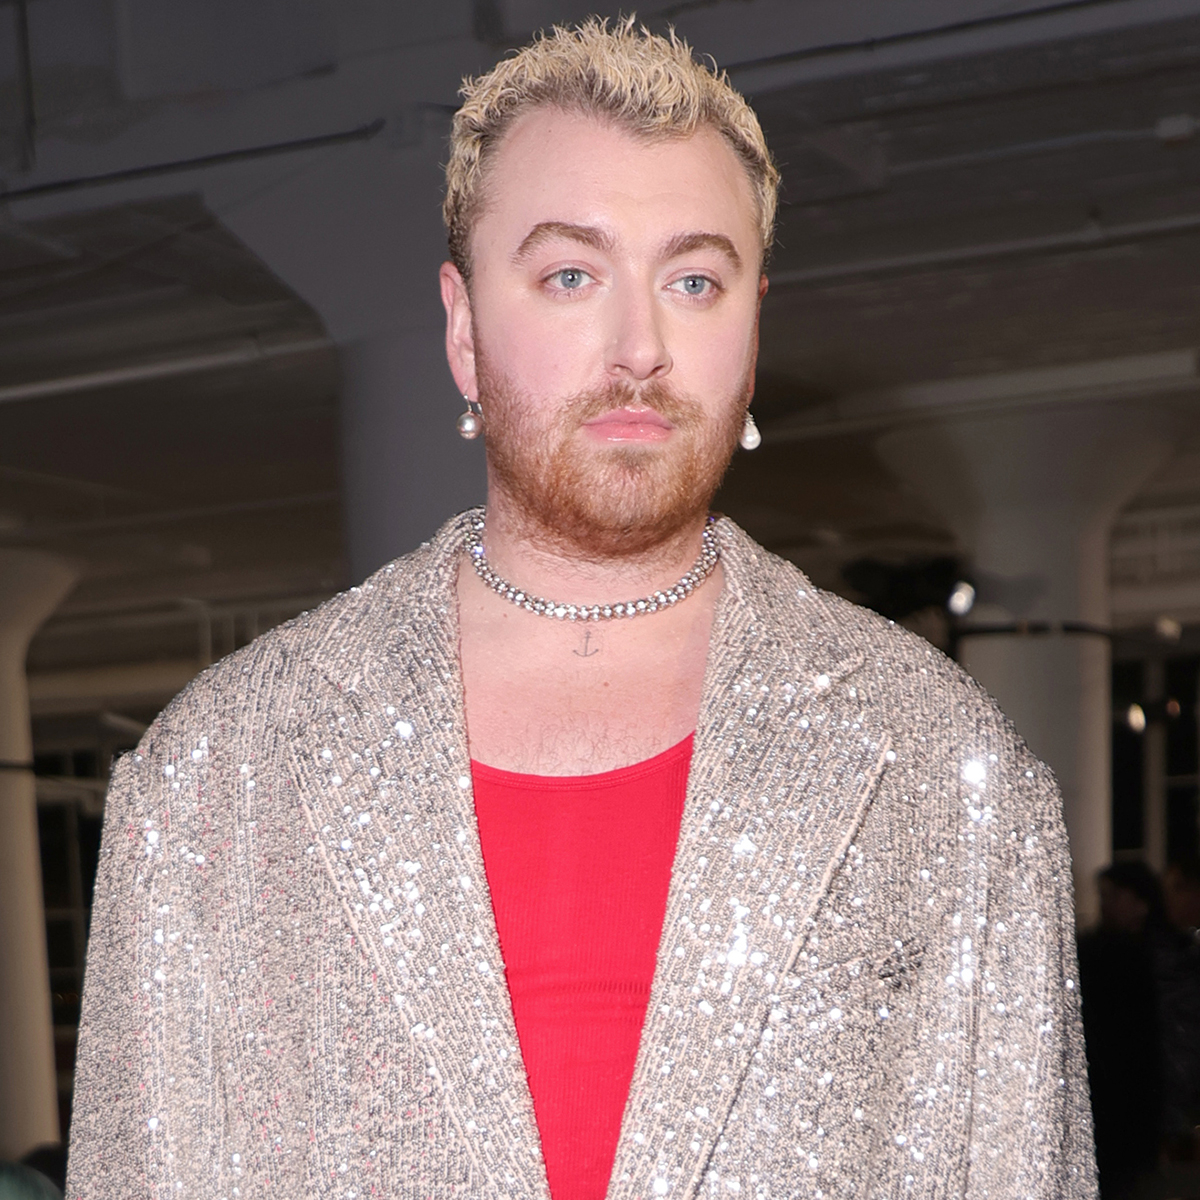 Sam Smith Shares They Were Unable to Walk After Skiing Accident